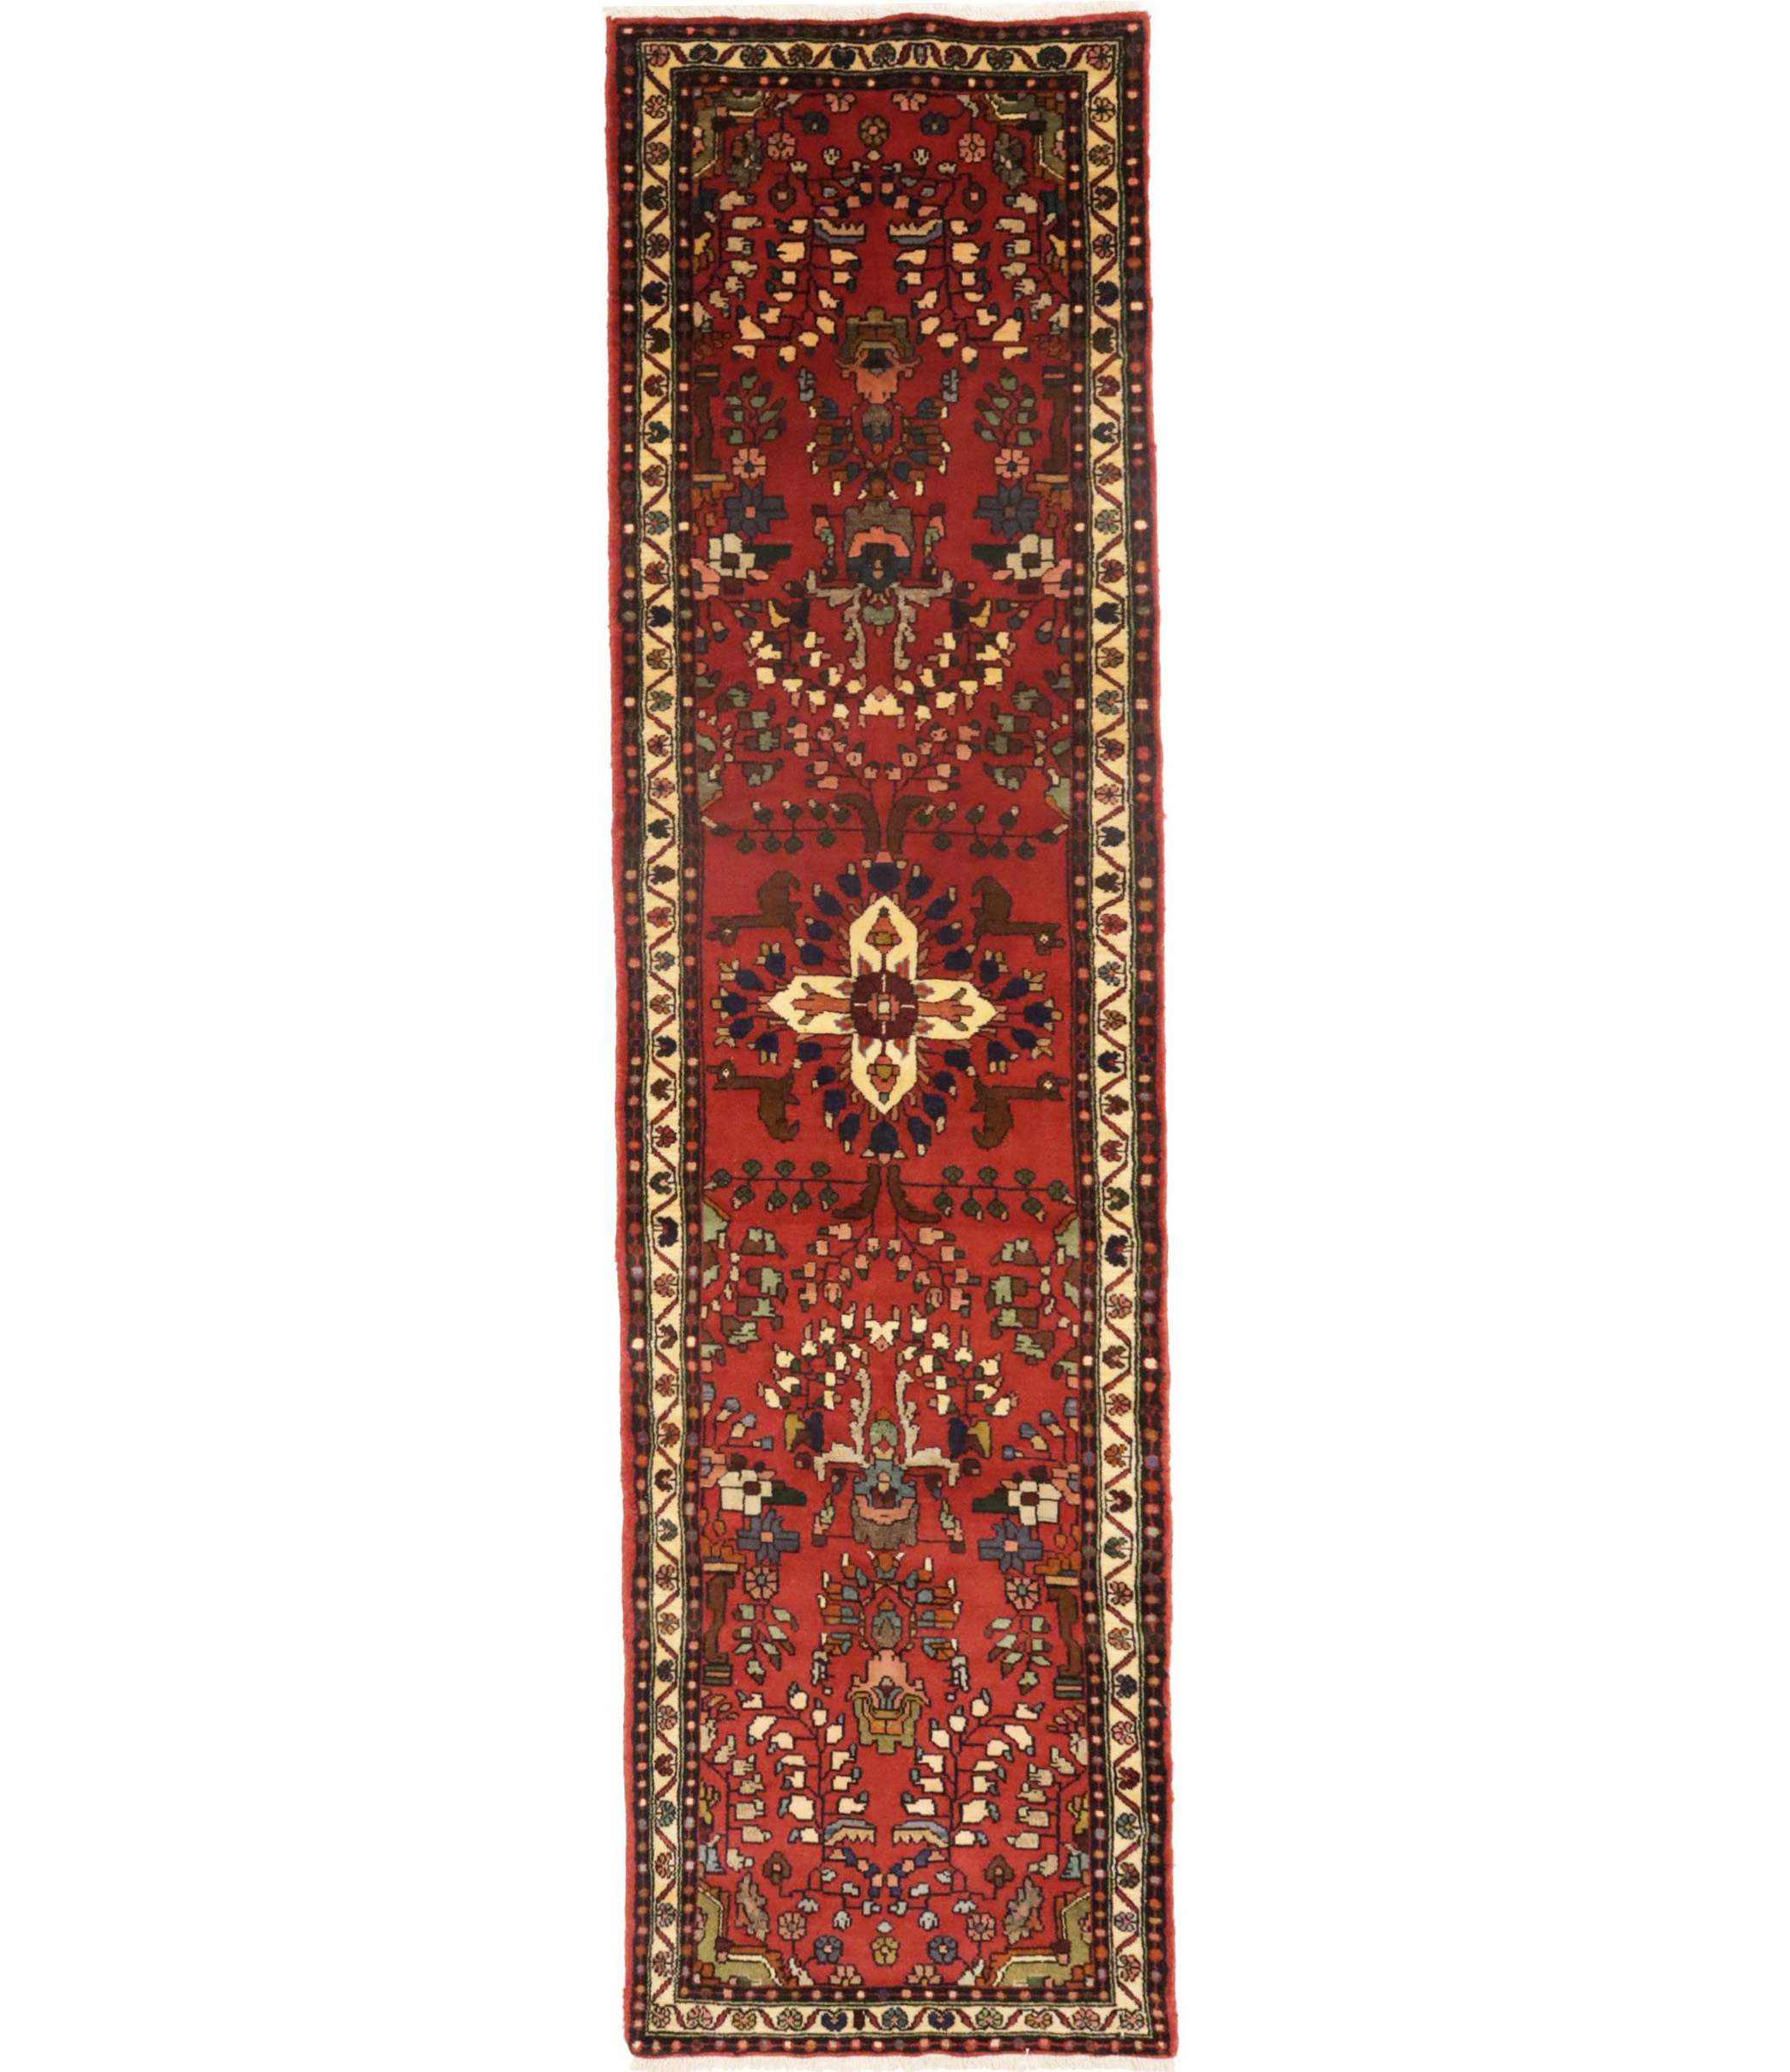 Vintage Red Floral 2'5X9'7 Lilian Persian Runner Rug